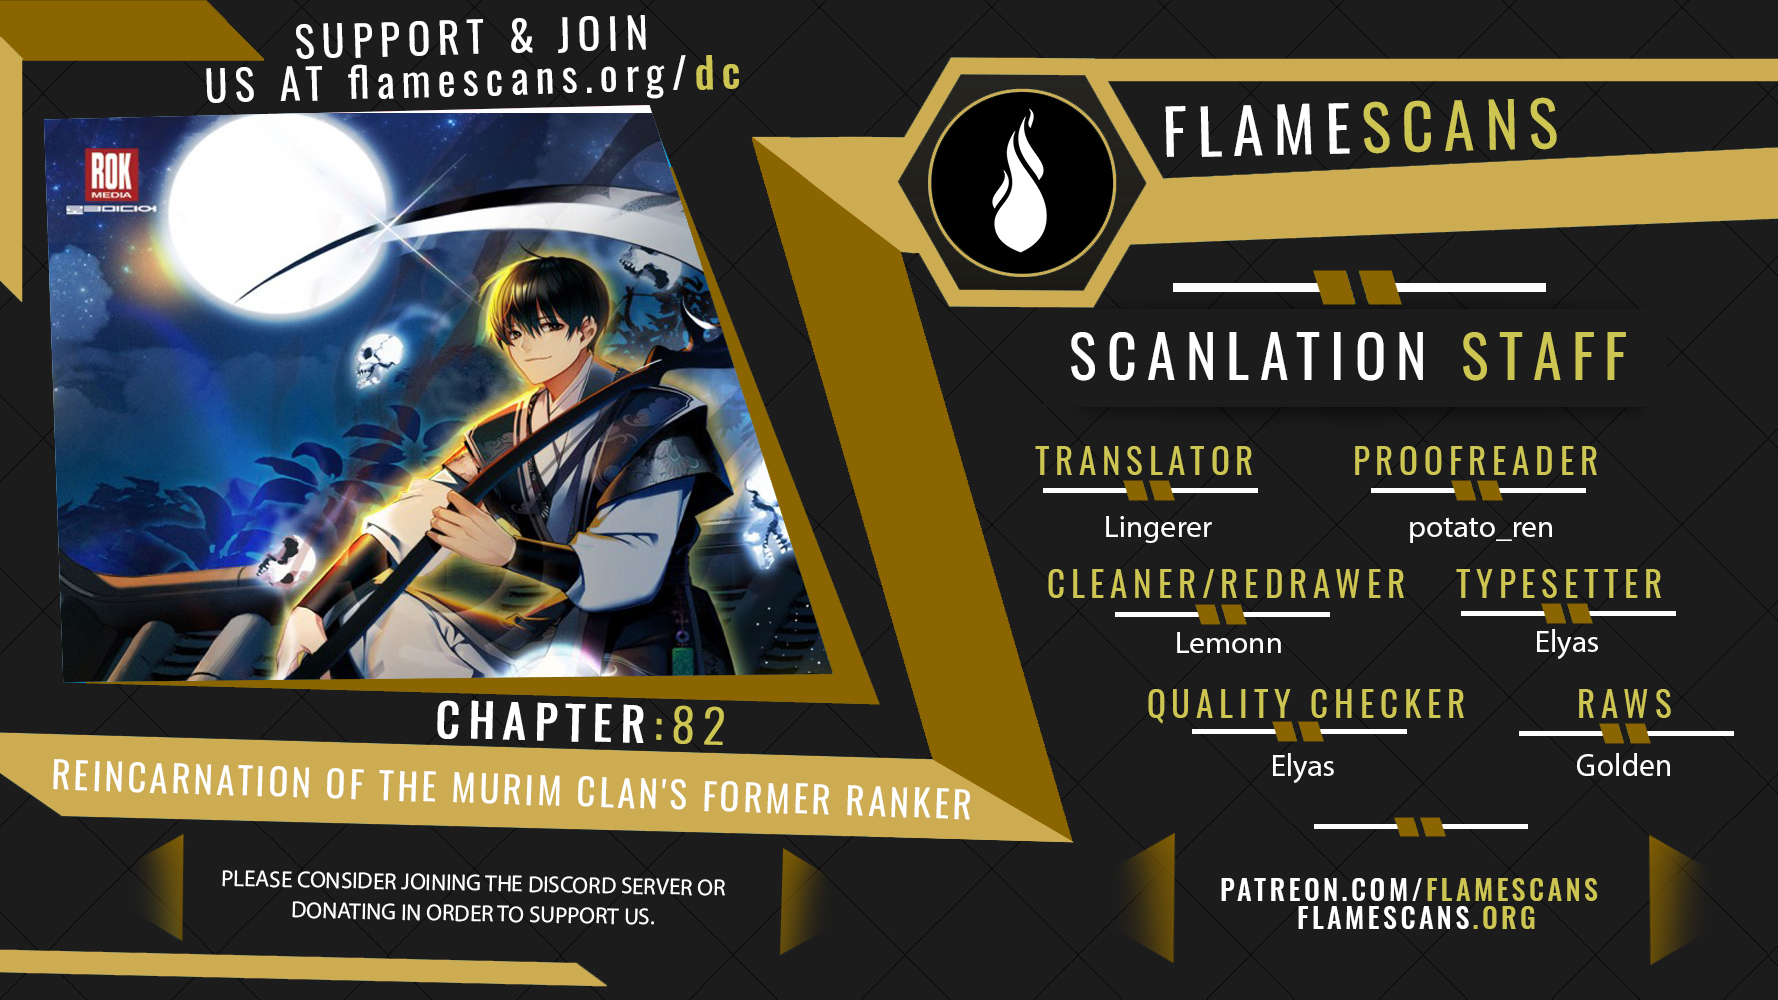 Reincarnation of the Murim Clan's Former Ranker - Chapter 22157 - Image 1